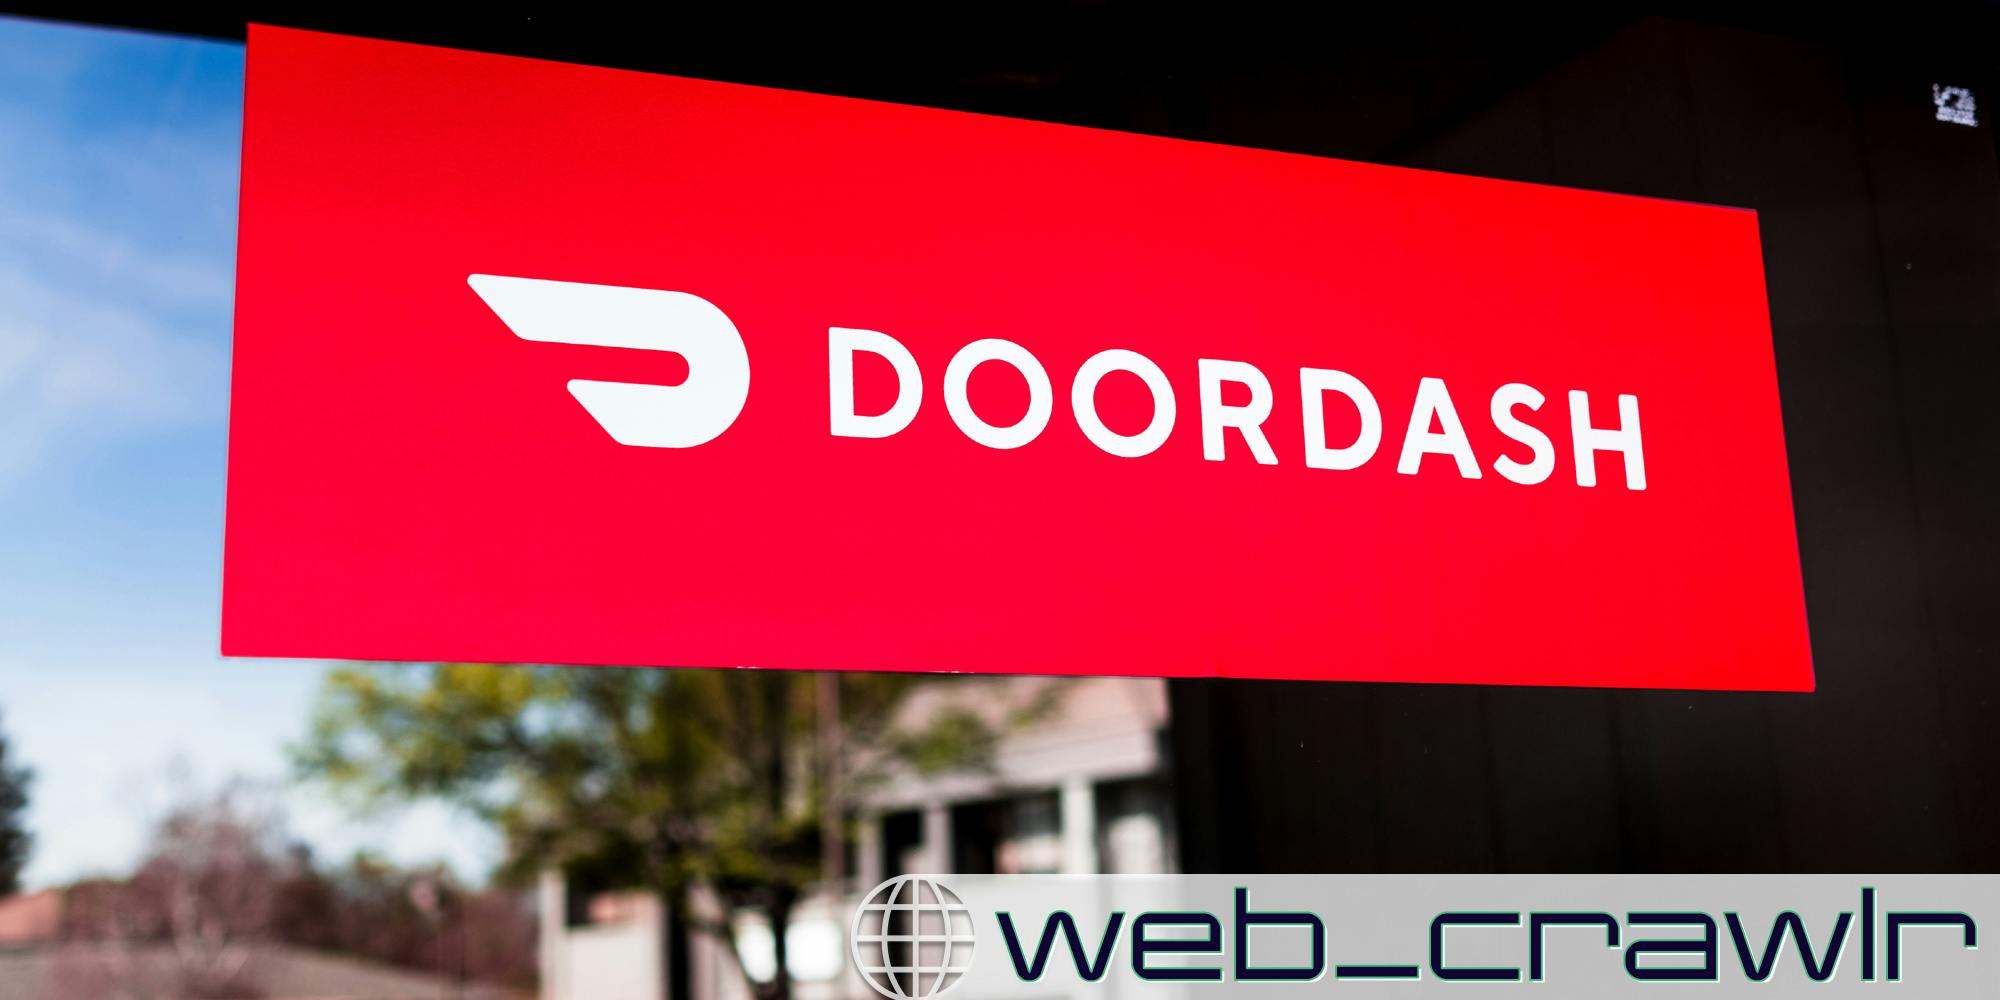 A DoorDash sign. The Daily Dot newsletter web_crawlr logo is in the bottom right corner.